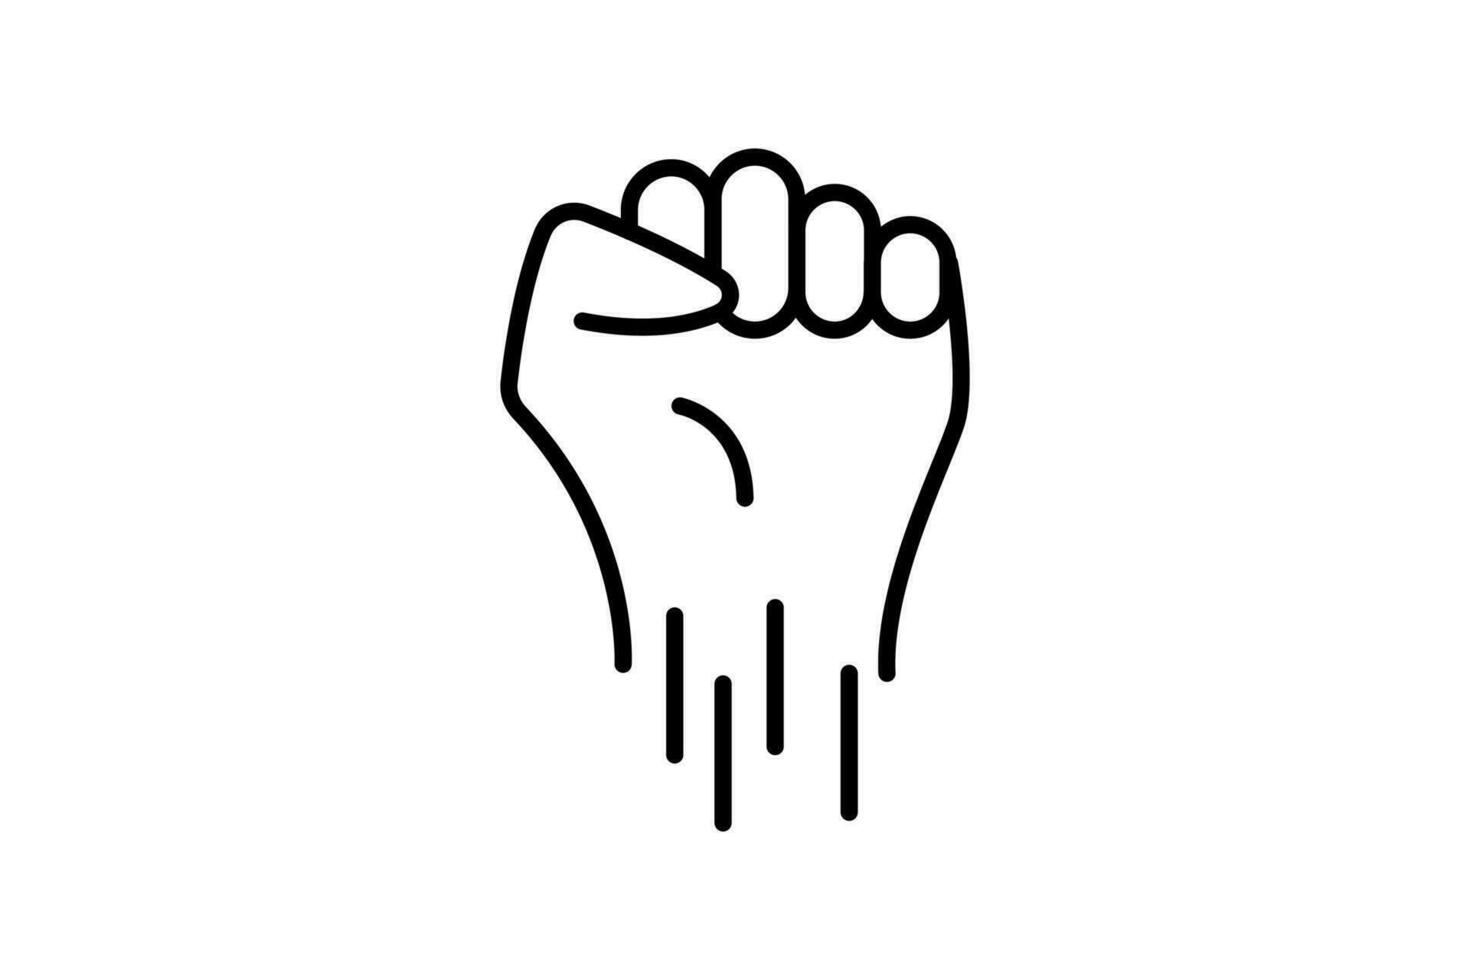 courage icon. hands clenched.  icon related to core values. line icon style. simple vector design editable